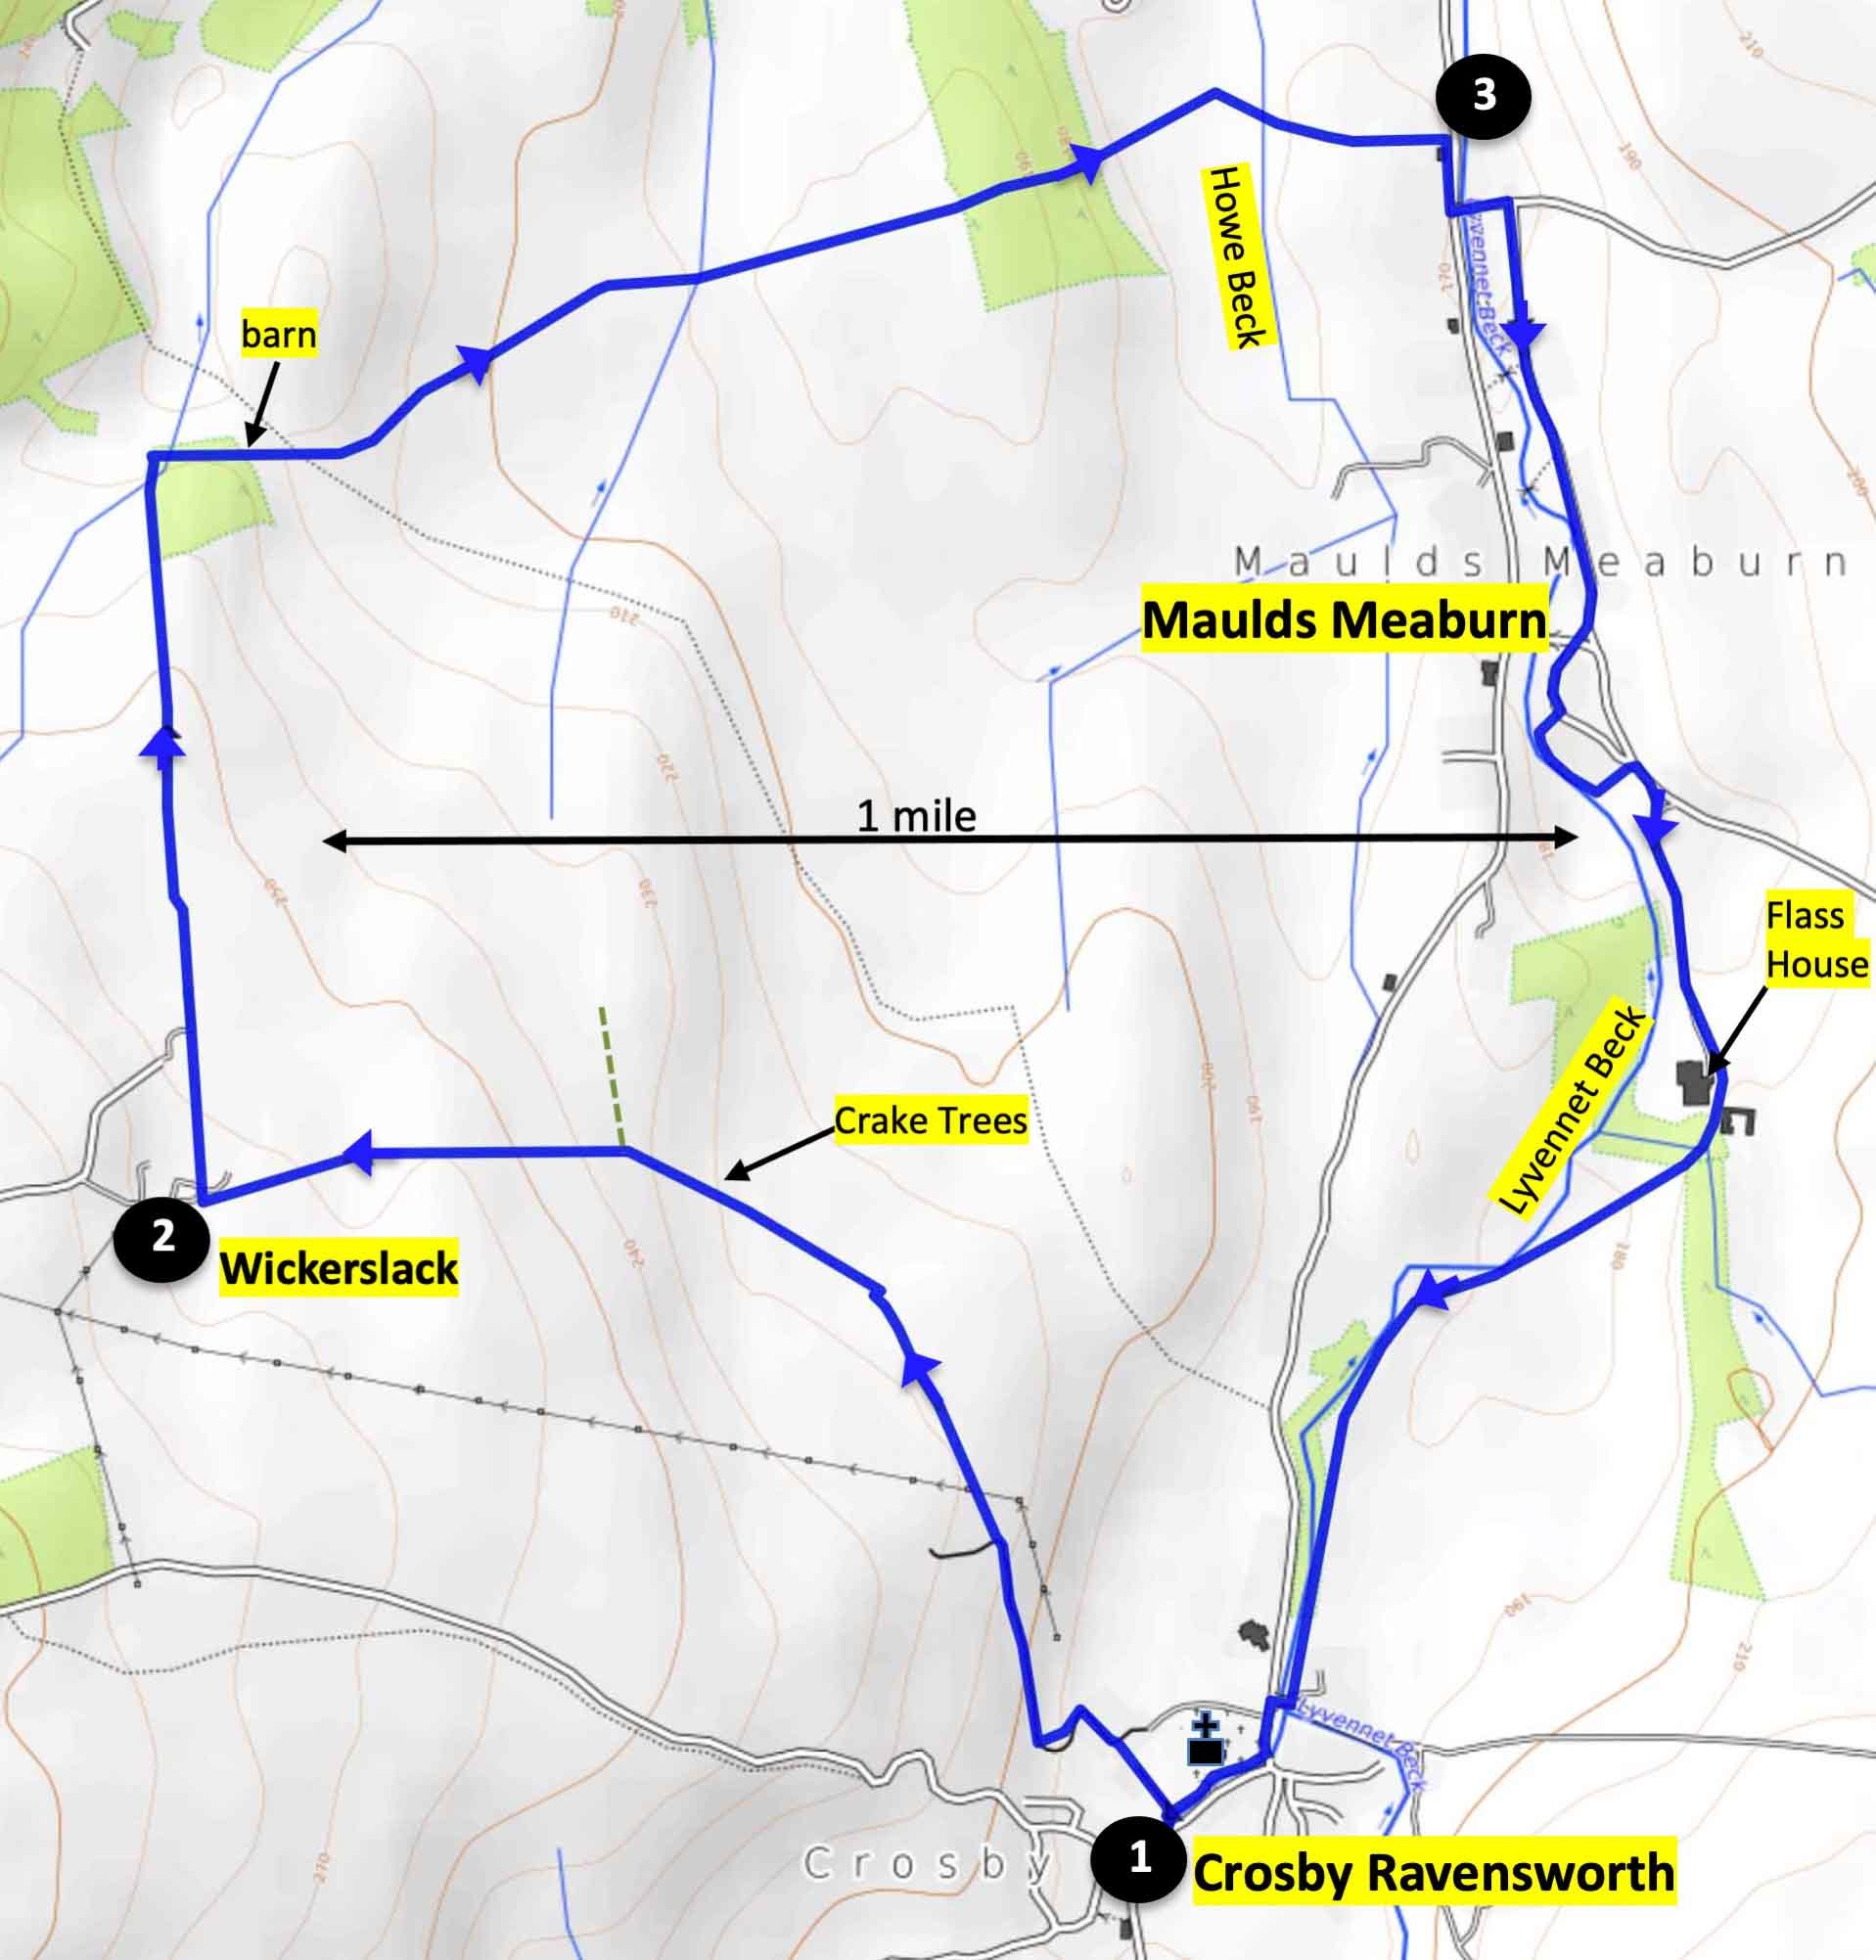 ROUTE: Crosby Ravensworth, Wickerslack and Maulds Meaburn walk